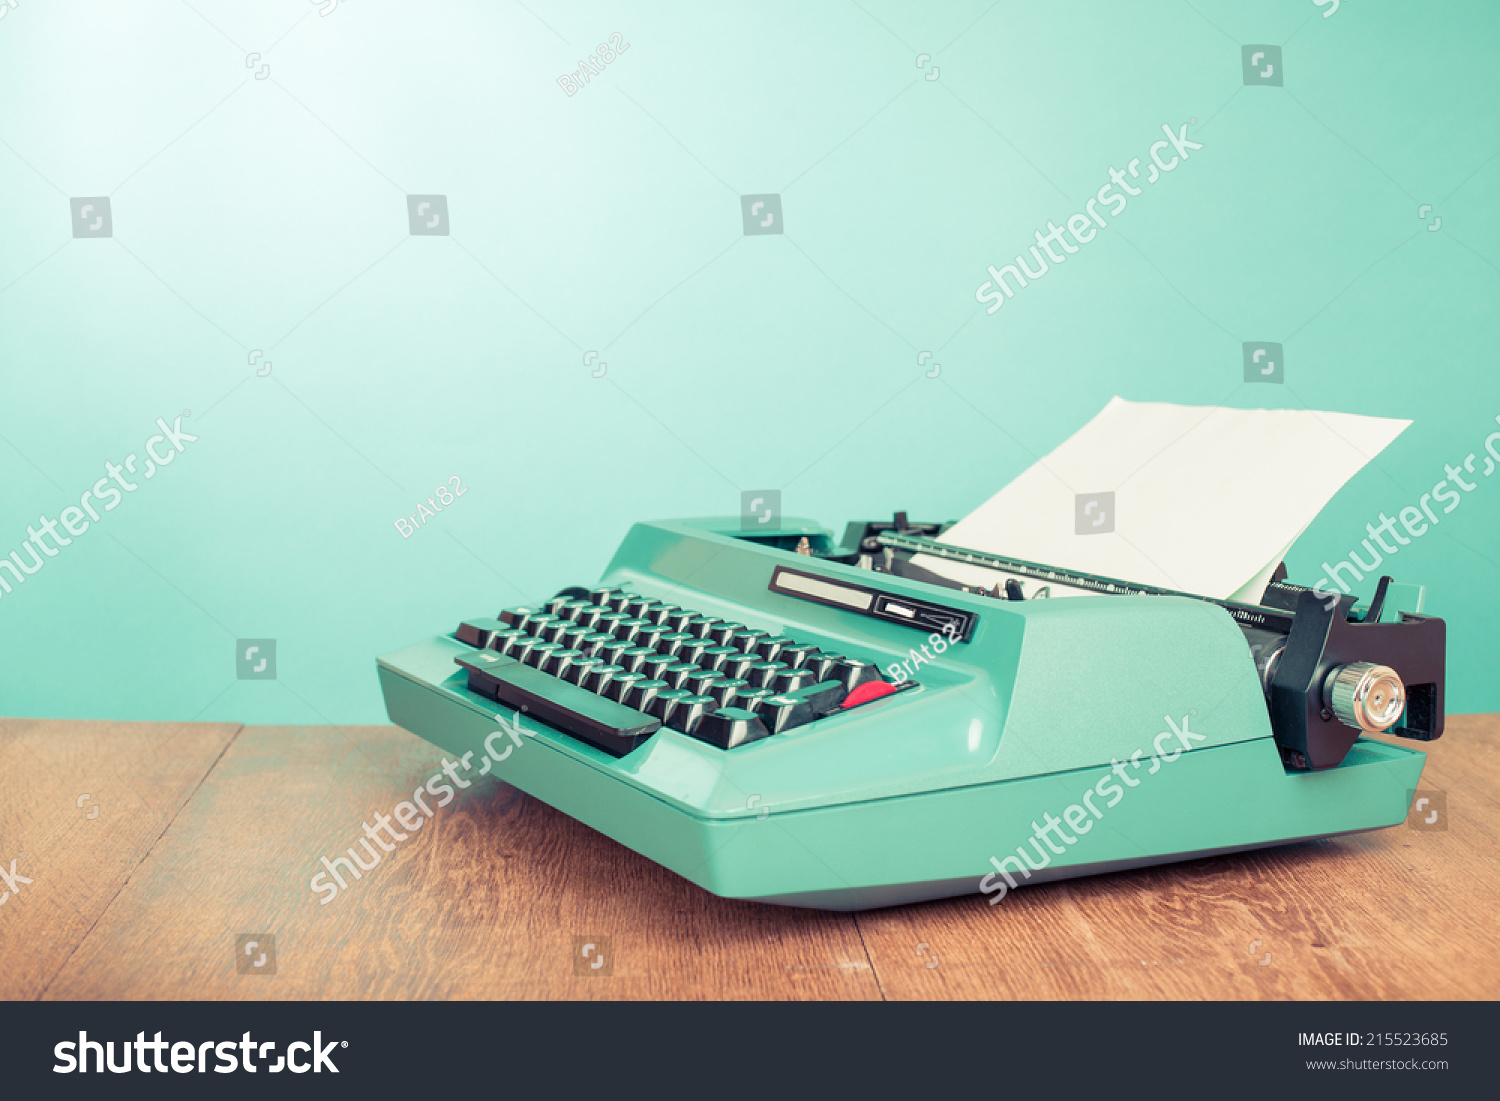 stock-photo-retro-old-typewriter-with-paper-on-wooden-table-front-mint-green-background-215523...jpg